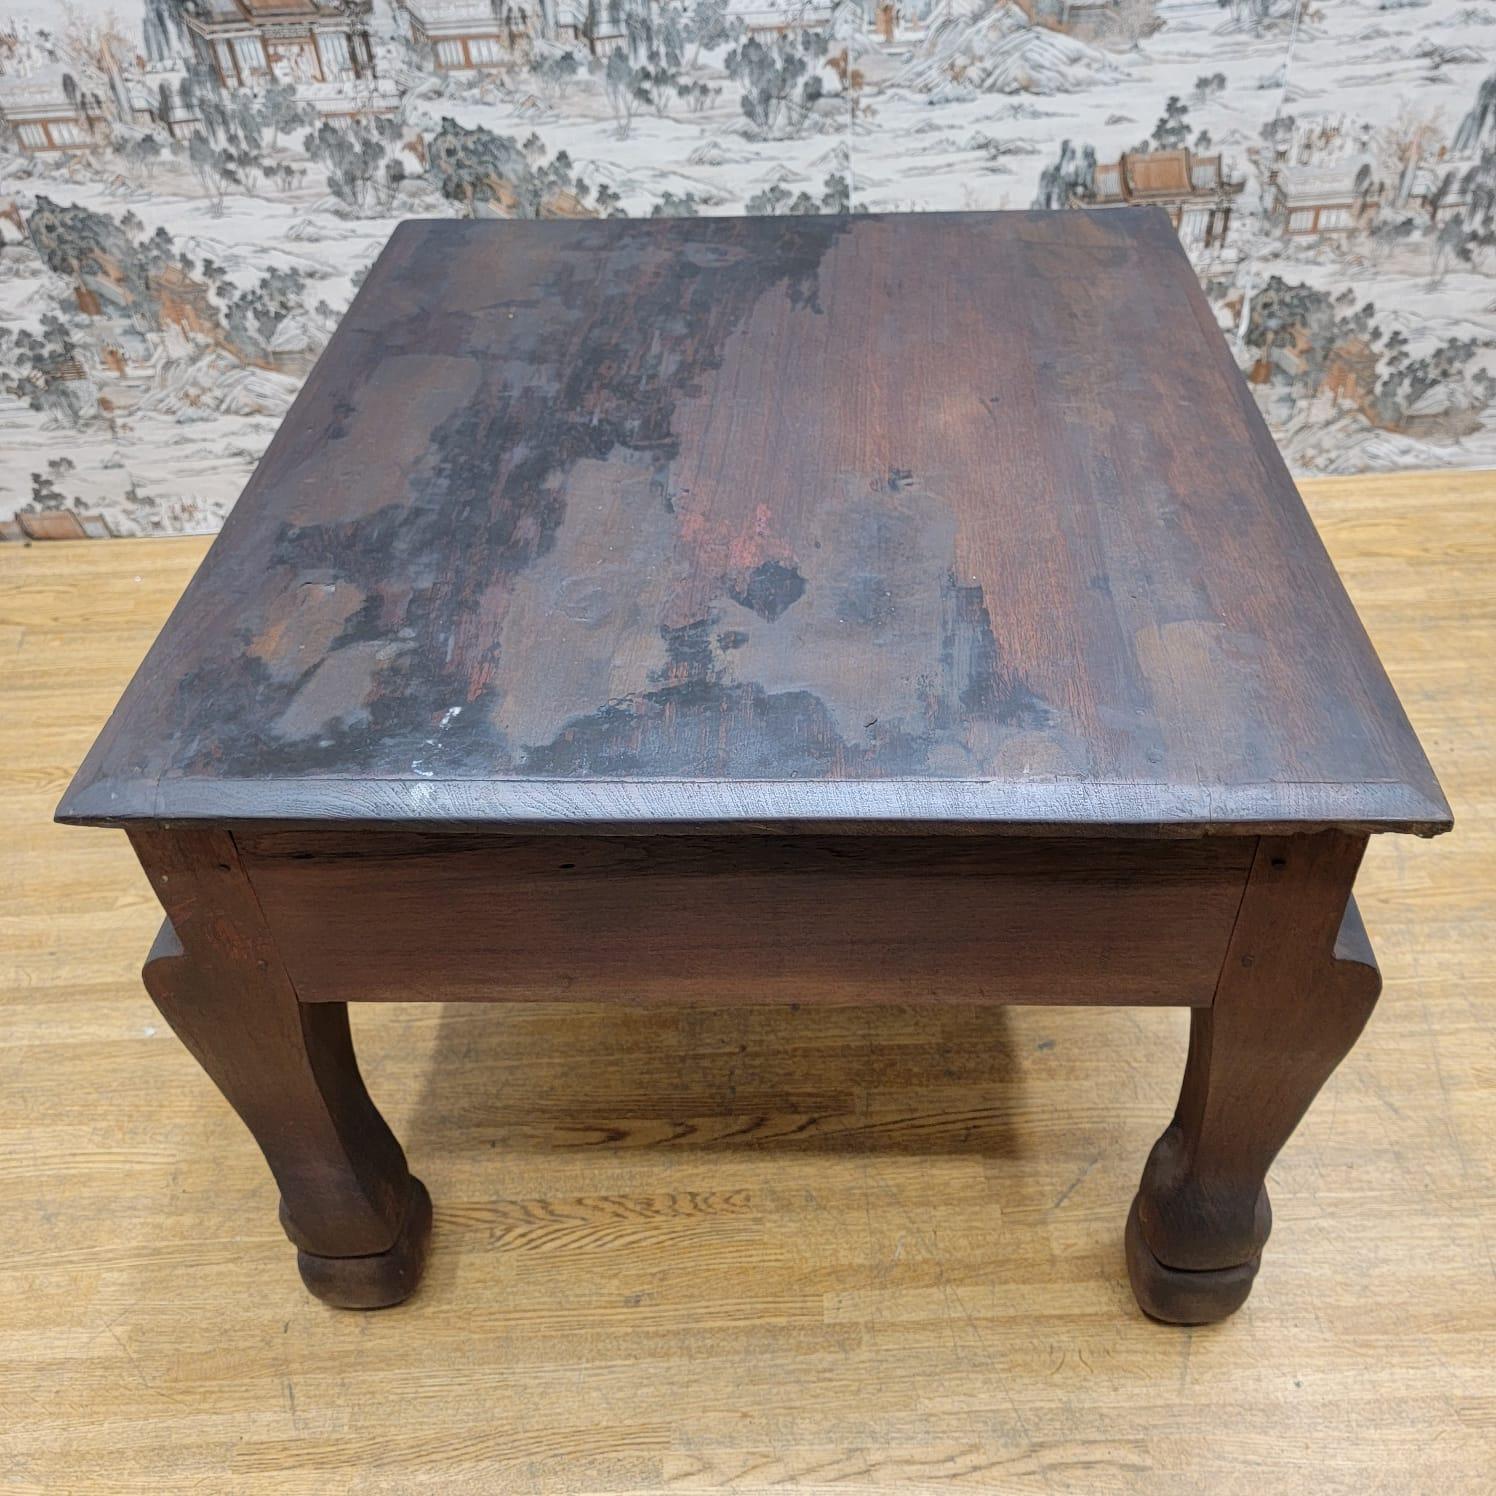 Antique East Indian Teak Wood Square Side Table with Carved Legs and Apron For Sale 1